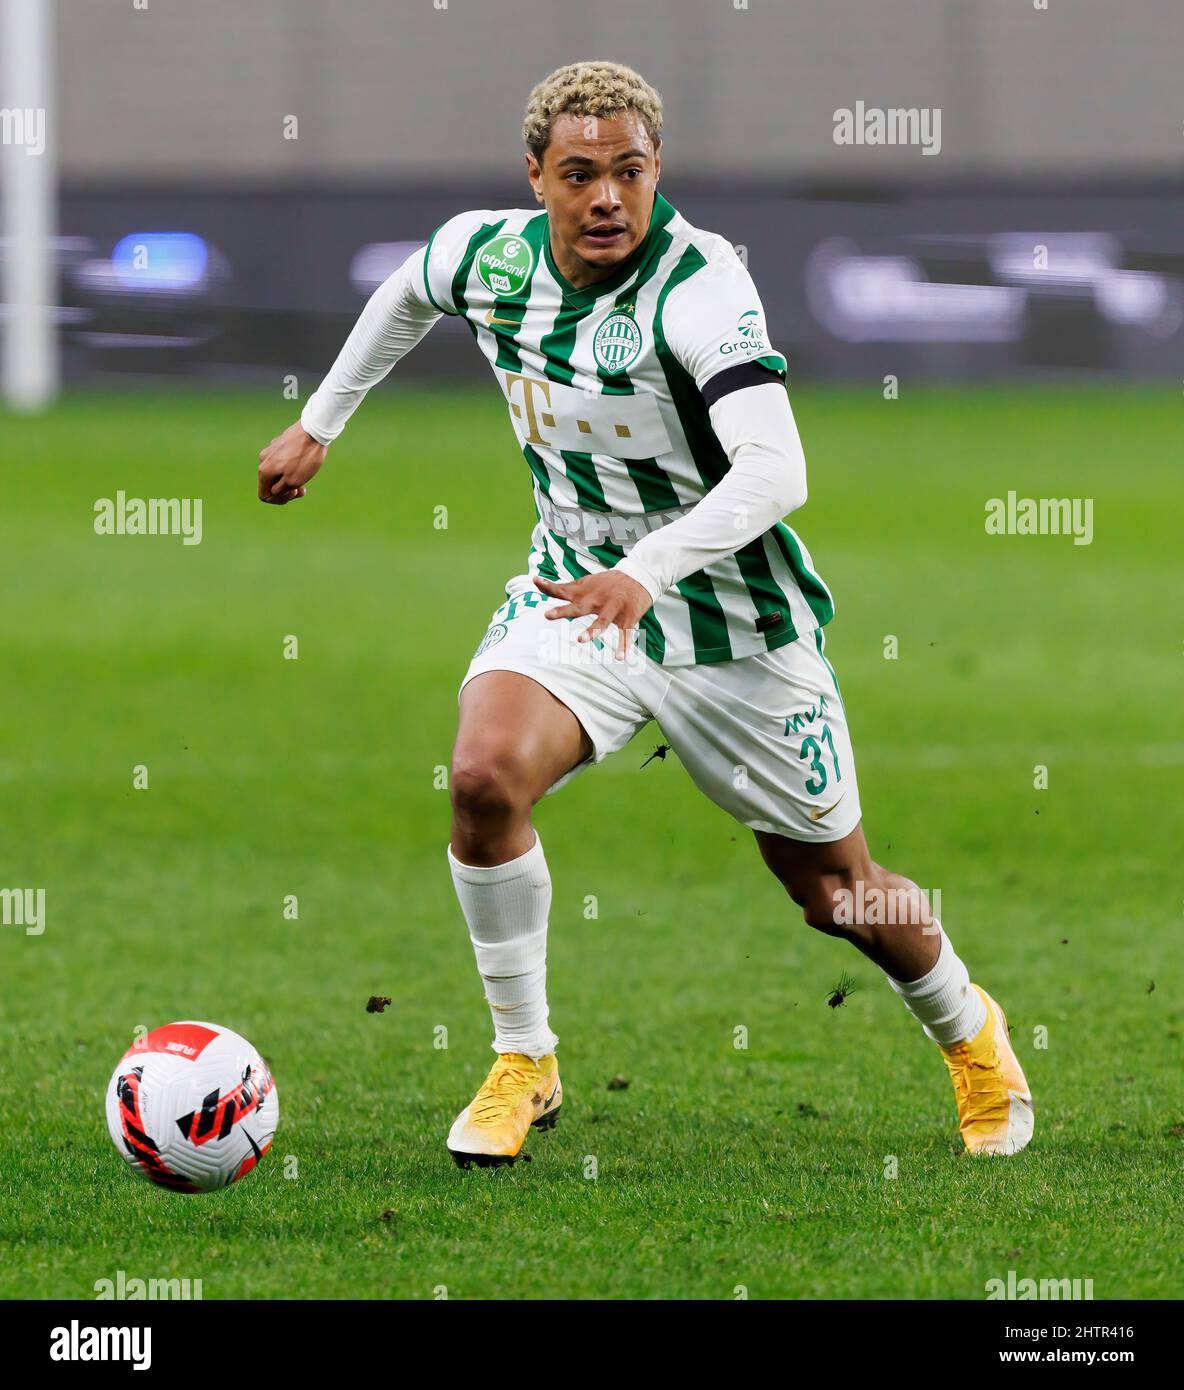 Henry Wingo of Ferencvarosi TC controls the ball during the